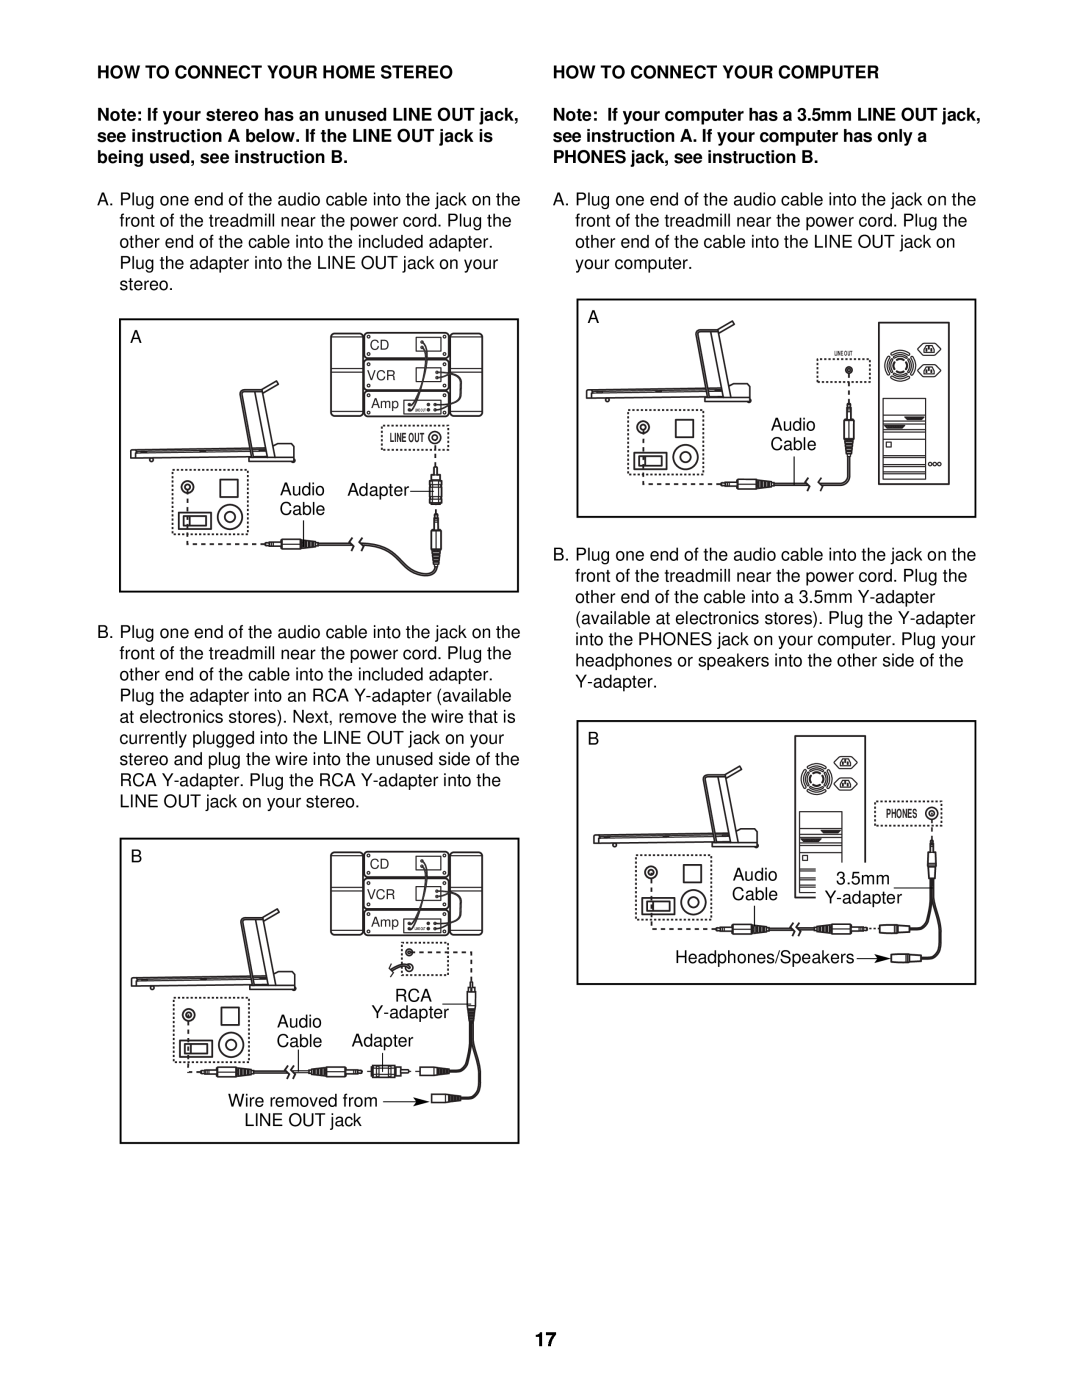 NordicTrack NTL99030 user manual How To Connect Your Home Stereo, How To Connect Your Computer, LINE OUT jack 